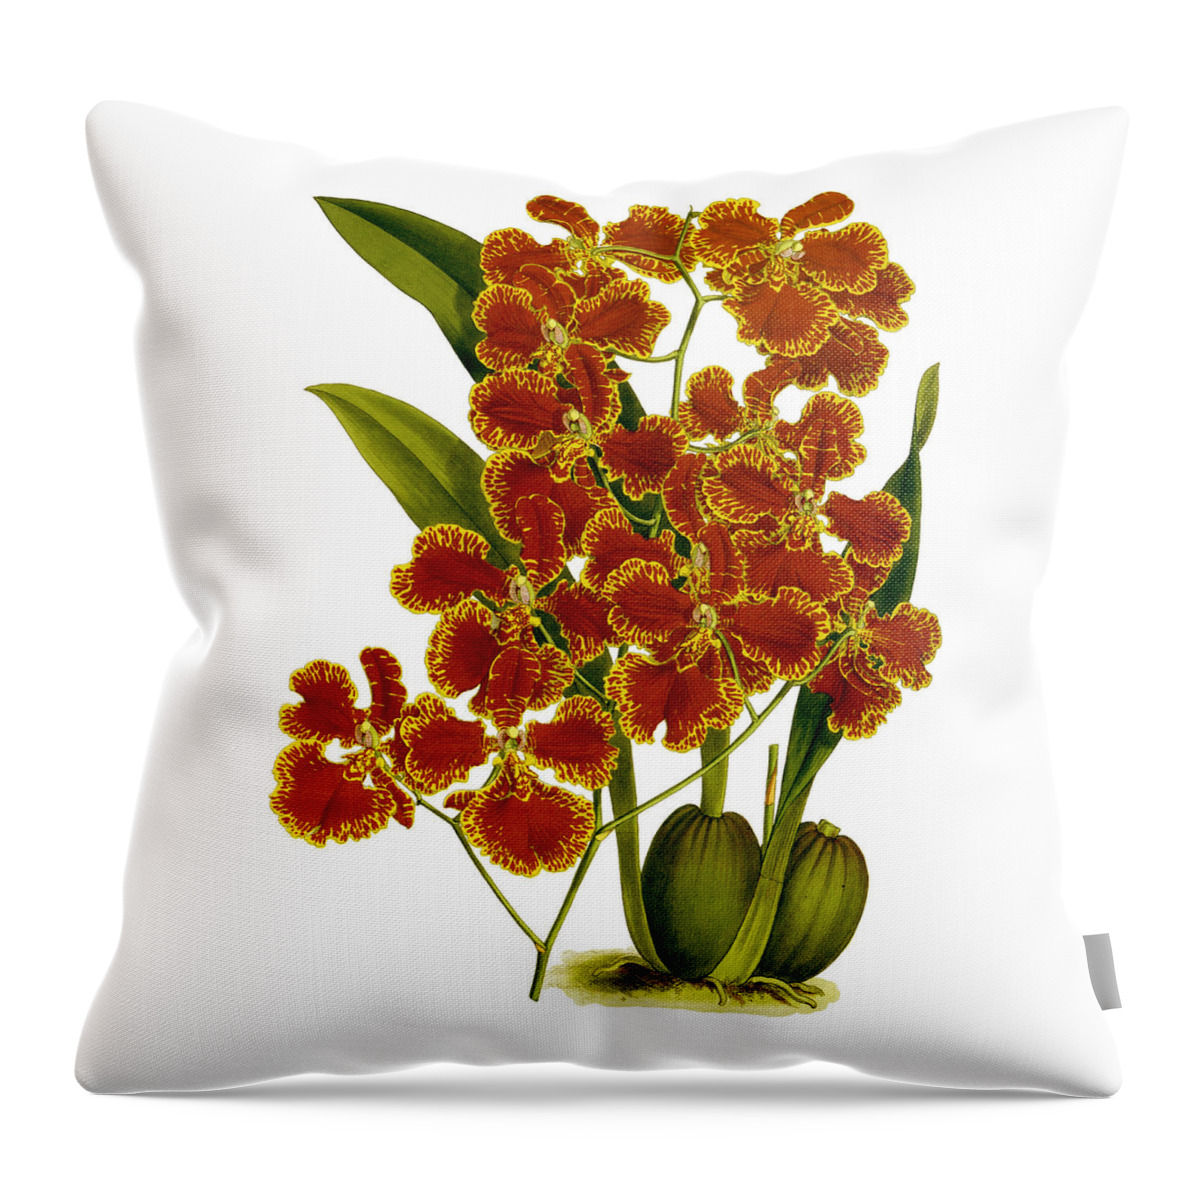 Oncidium Throw Pillow featuring the mixed media Oncidium Forbesii Orchid by World Art Collective